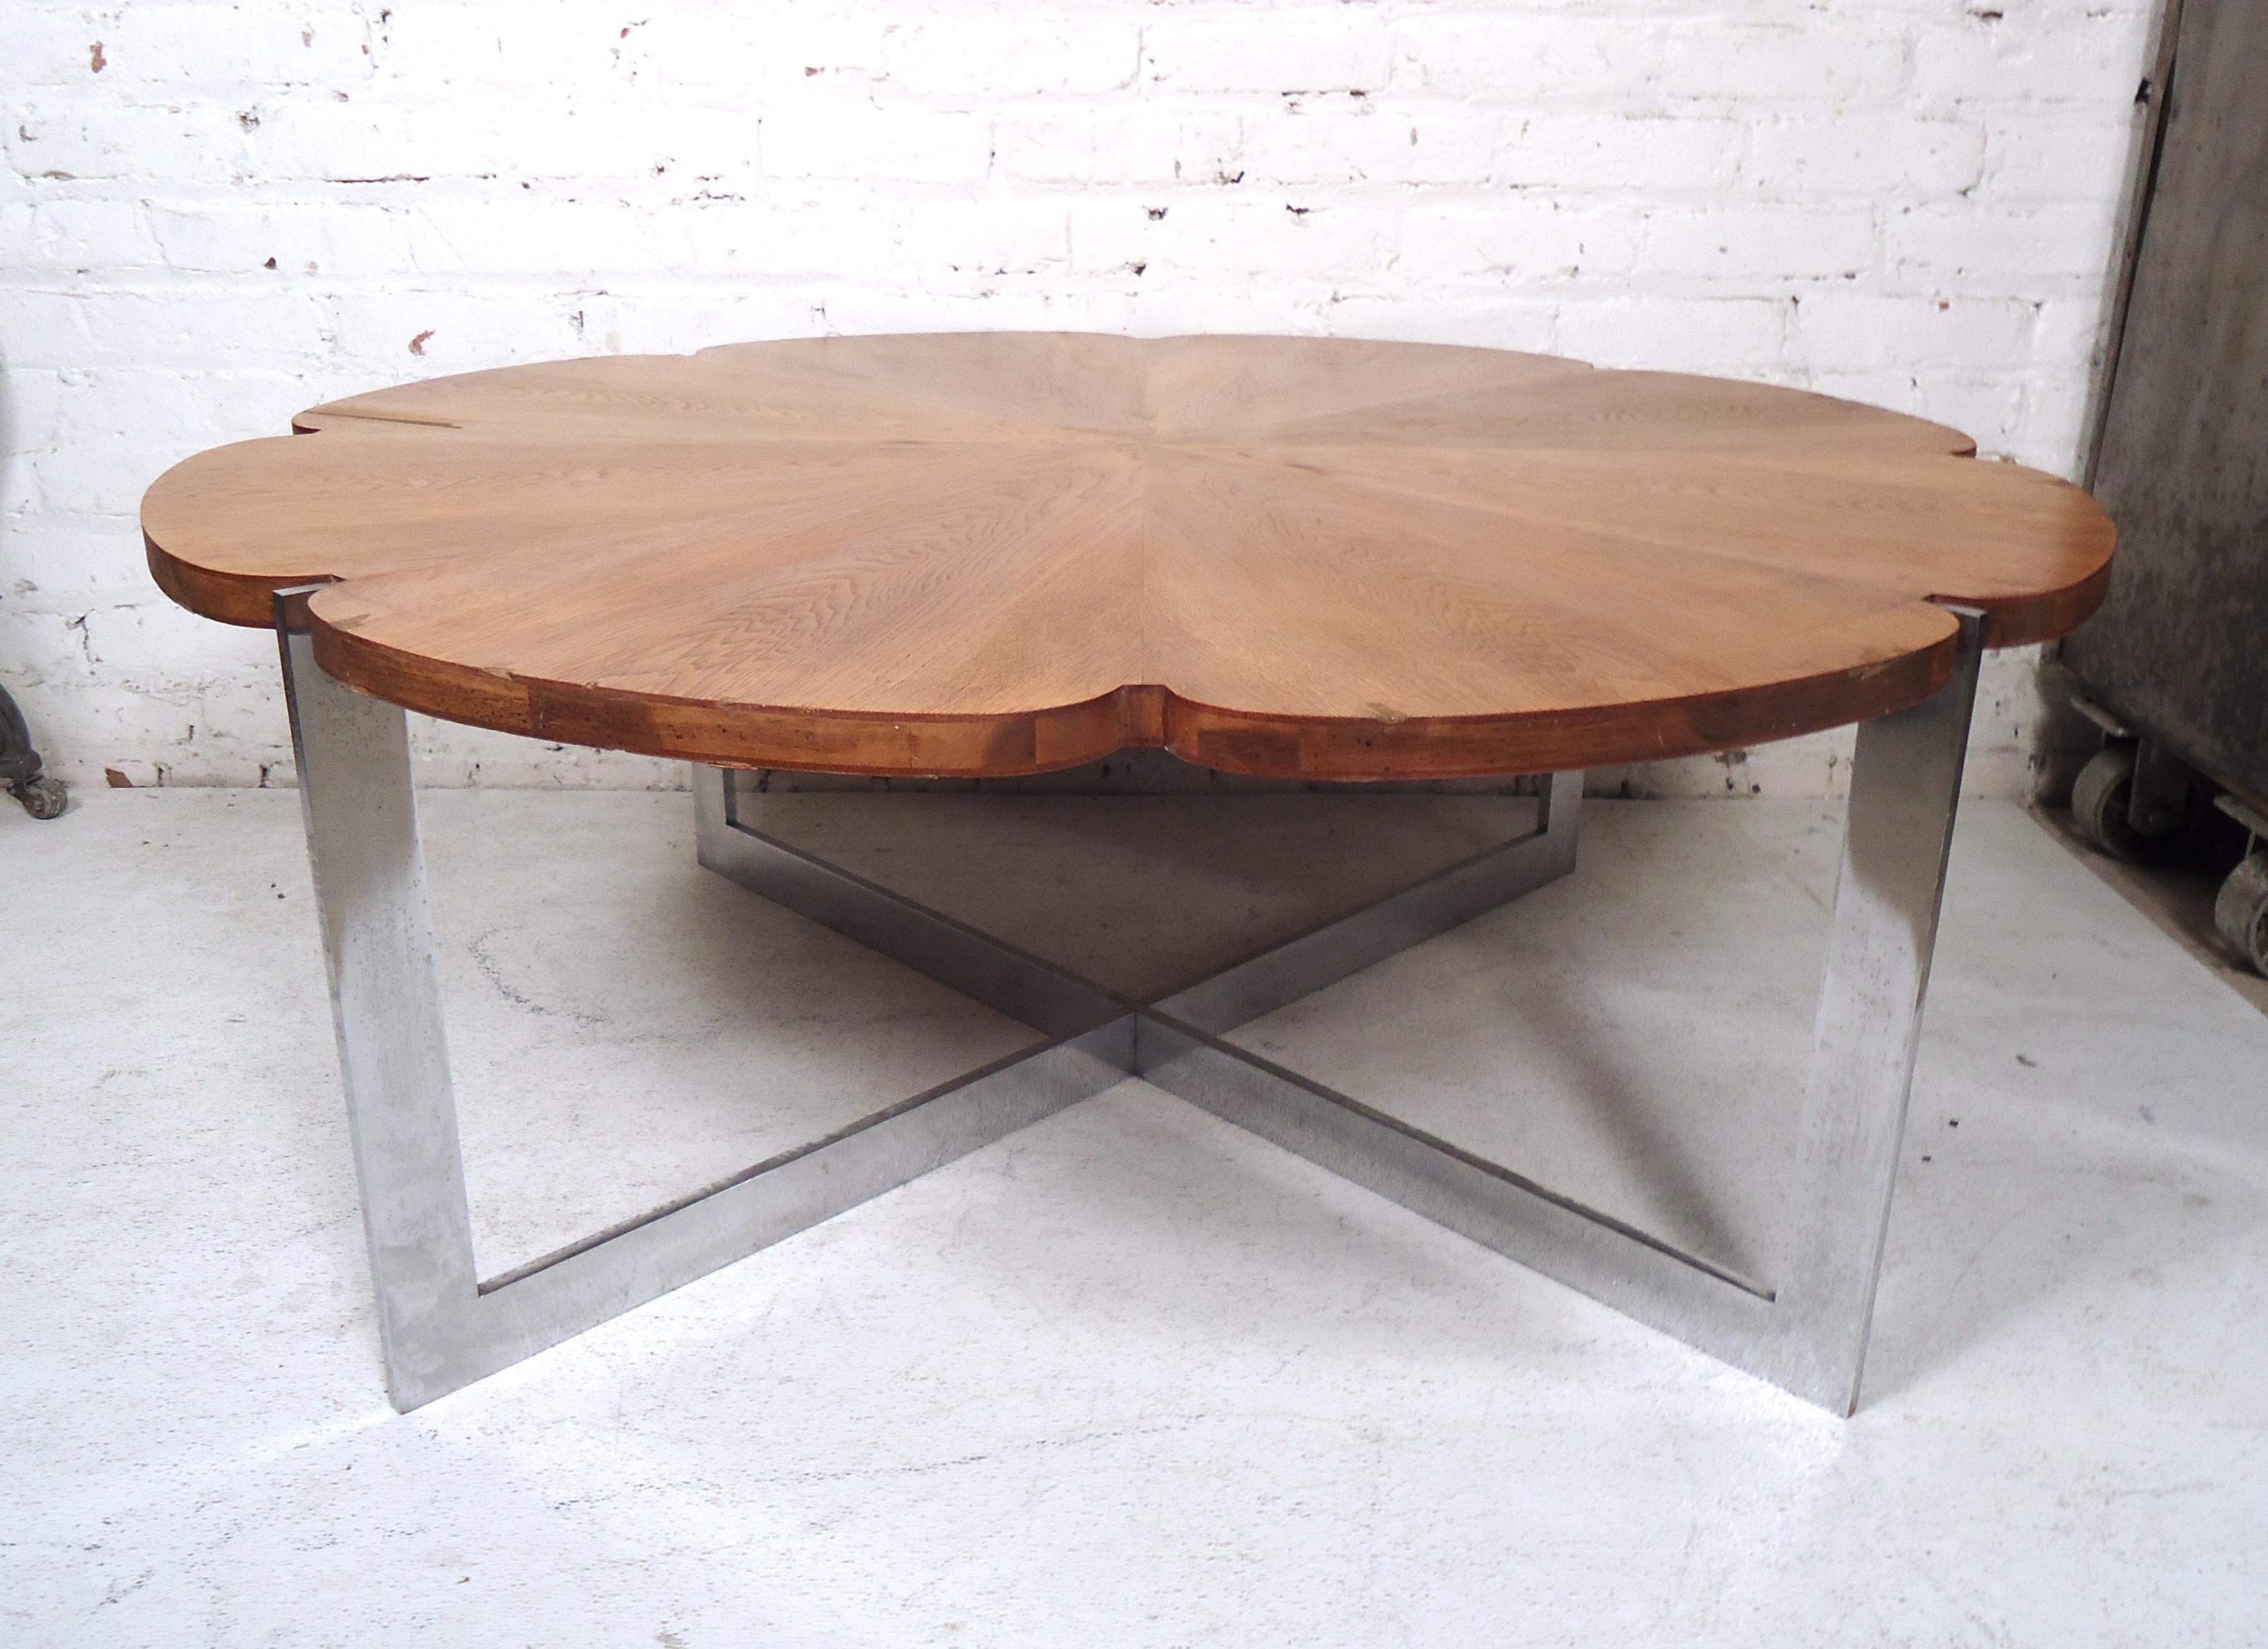 Gorgeous Mid-Century Modern Milo Baughman coffee table features rich wood grain top and metal leg frames.
(Please confirm item location - NY or NJ - with dealer).